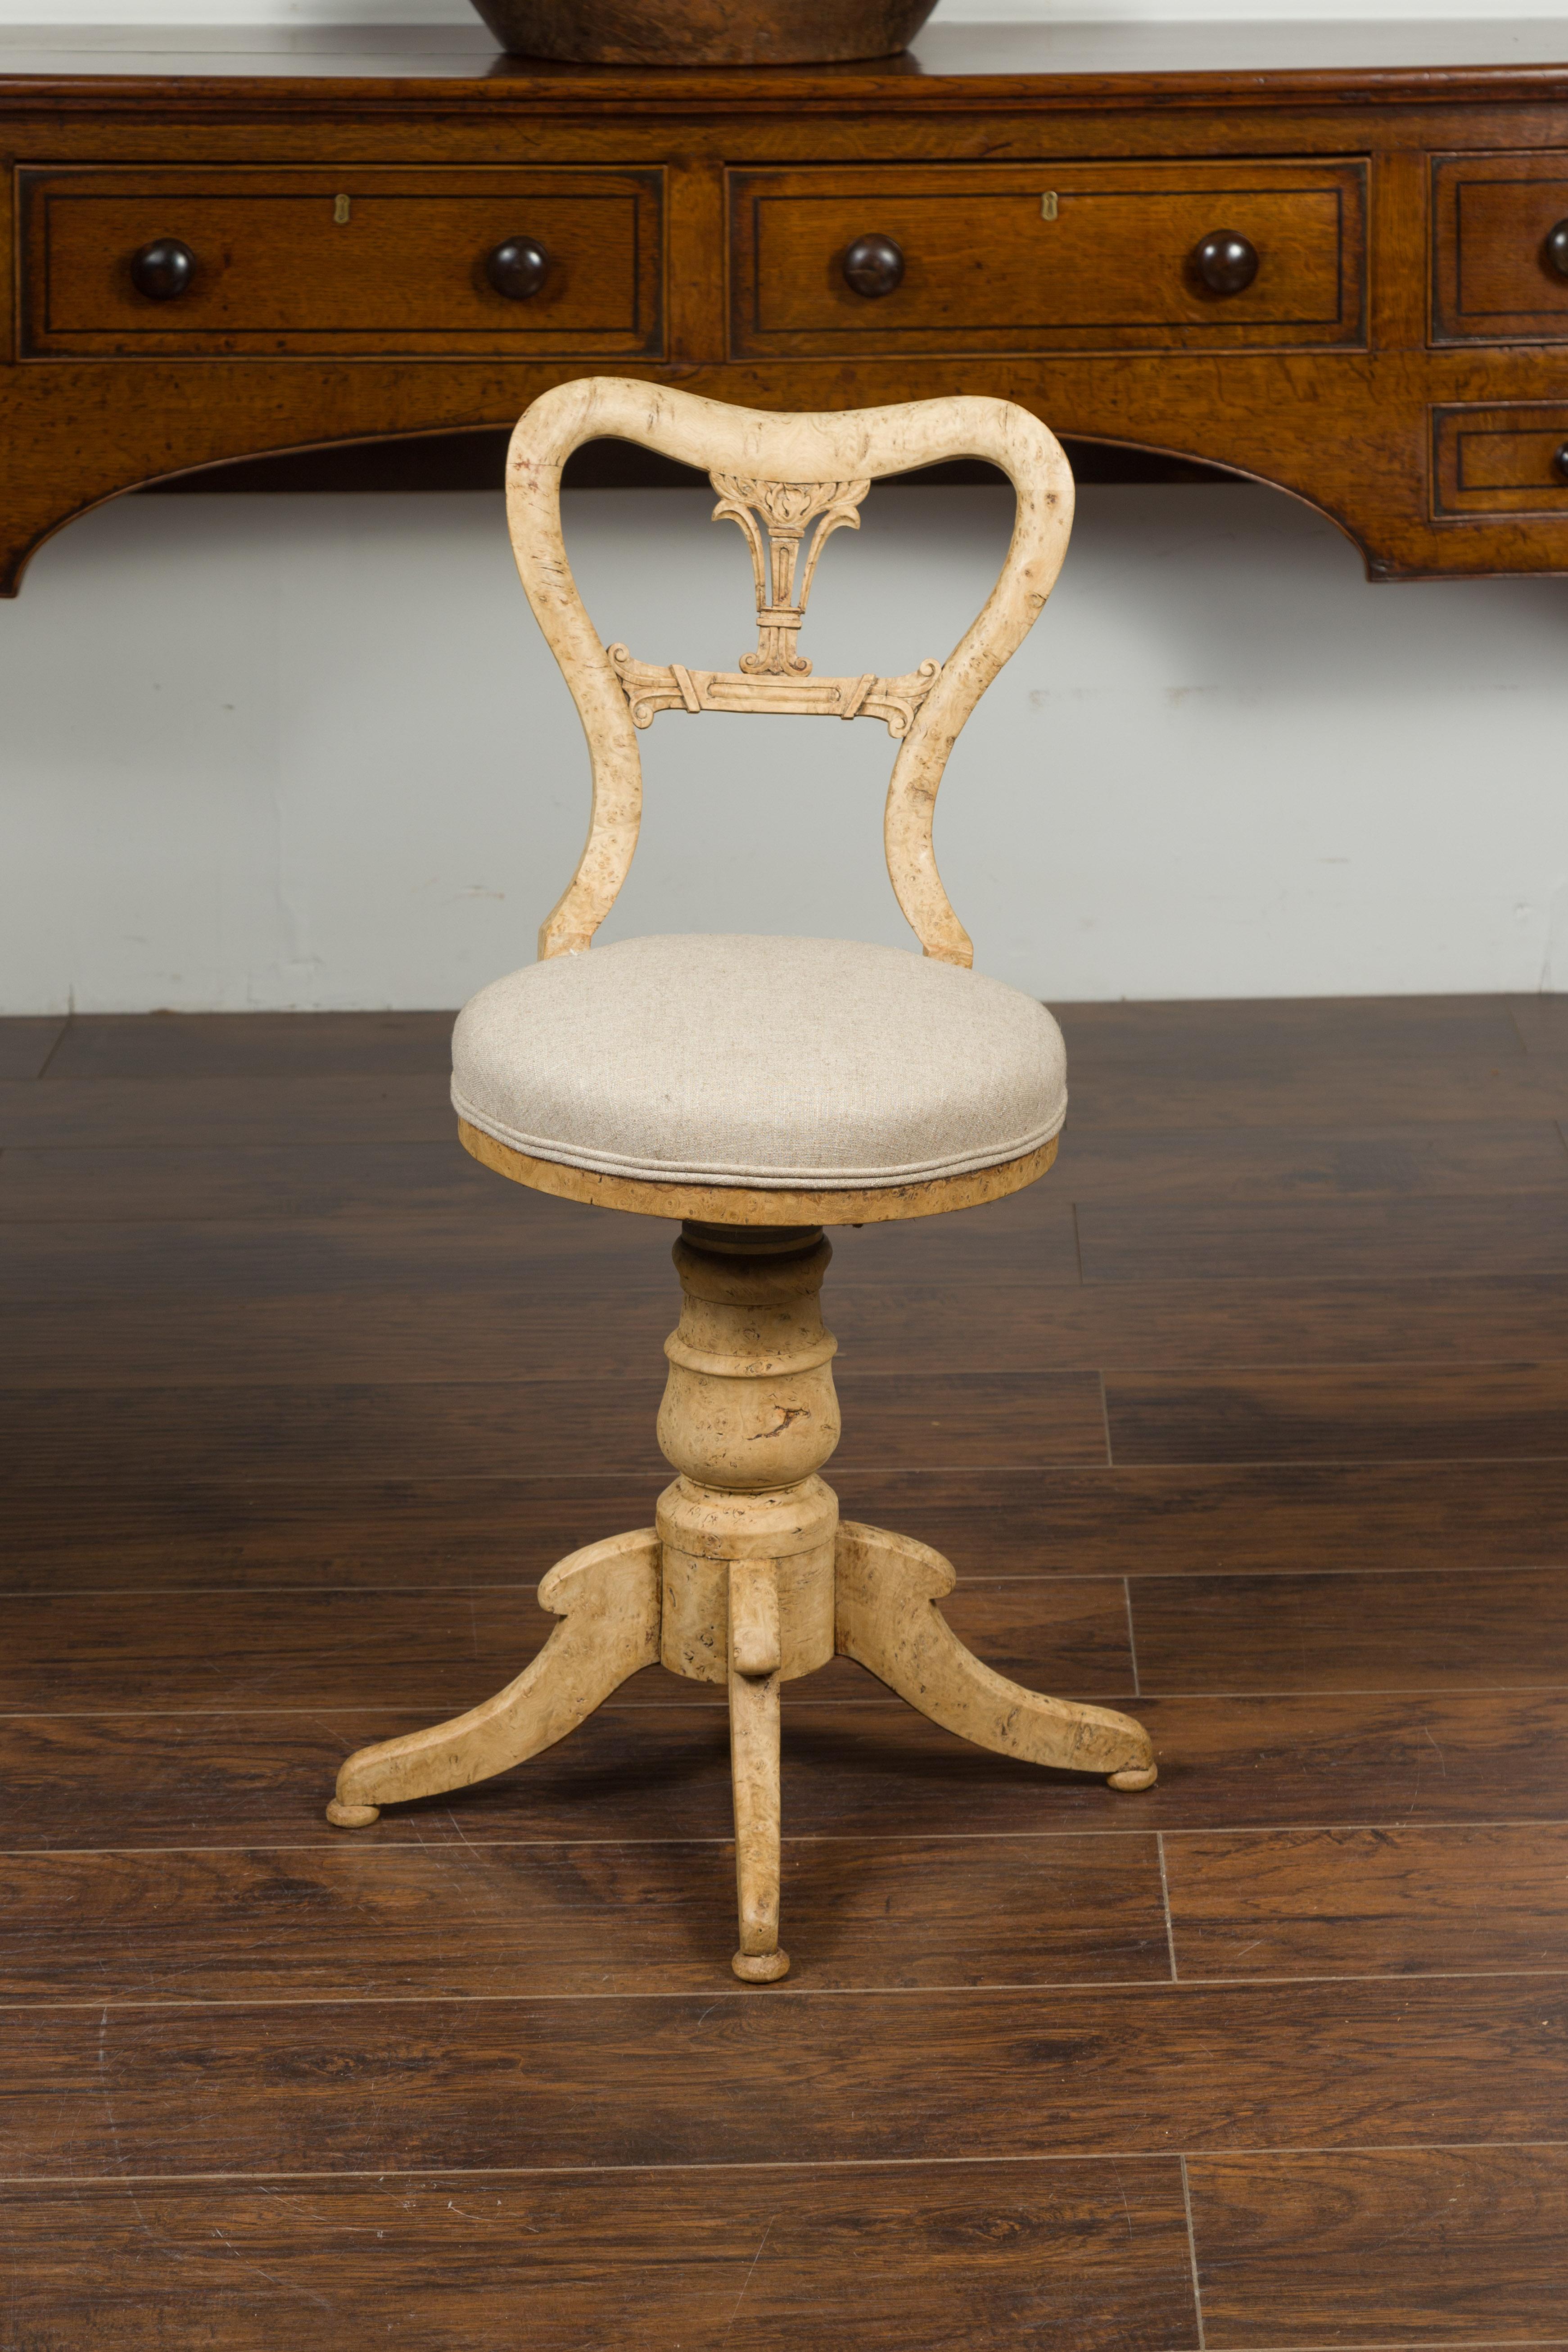 Austrian 1840s Biedermeier Bleached Burled Walnut Swivel Chair with Upholstery In Good Condition For Sale In Atlanta, GA